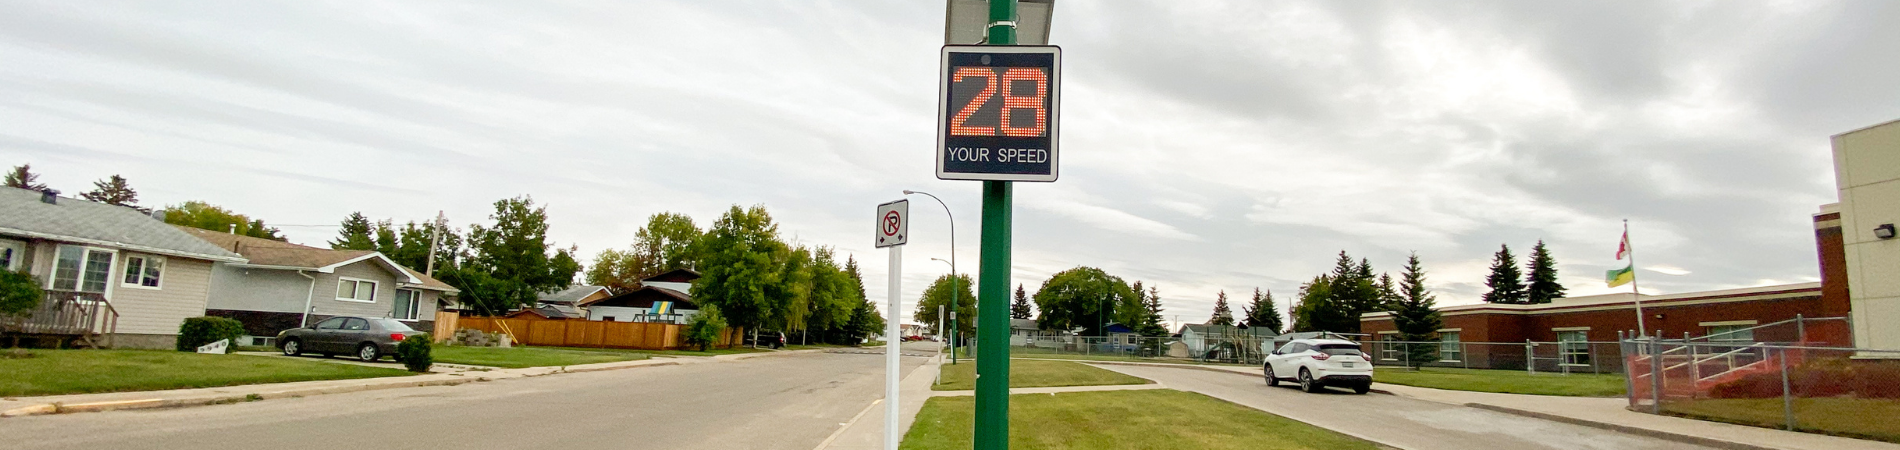 Photo of a speed alert sign